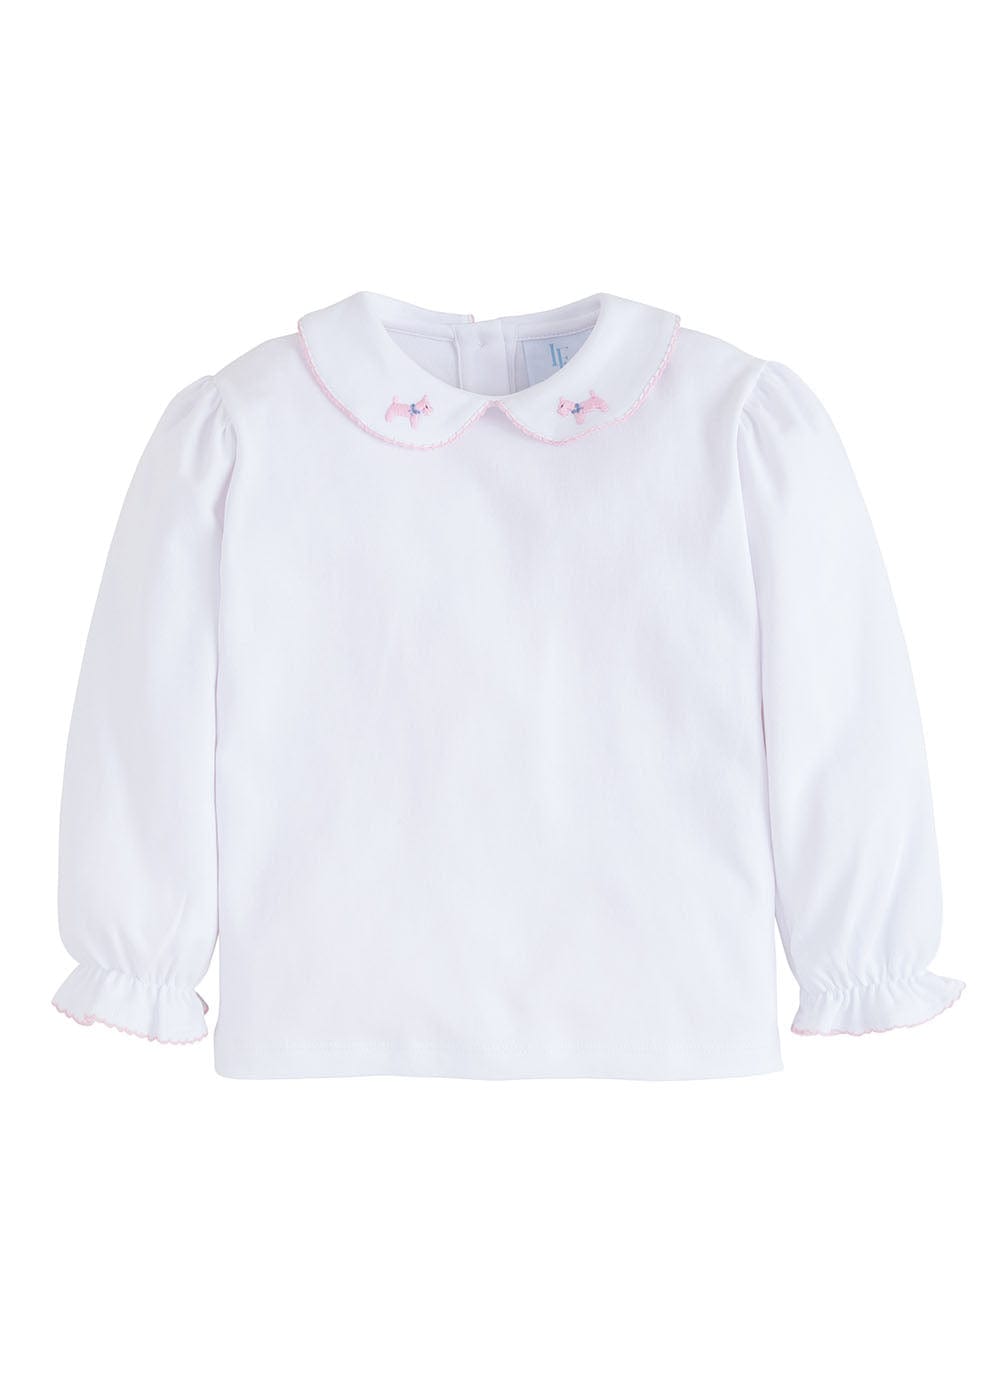 classic childrens clothing girls long sleeve blouse with peter pan collar and embroidered pink scottie dog on collar and pink pique